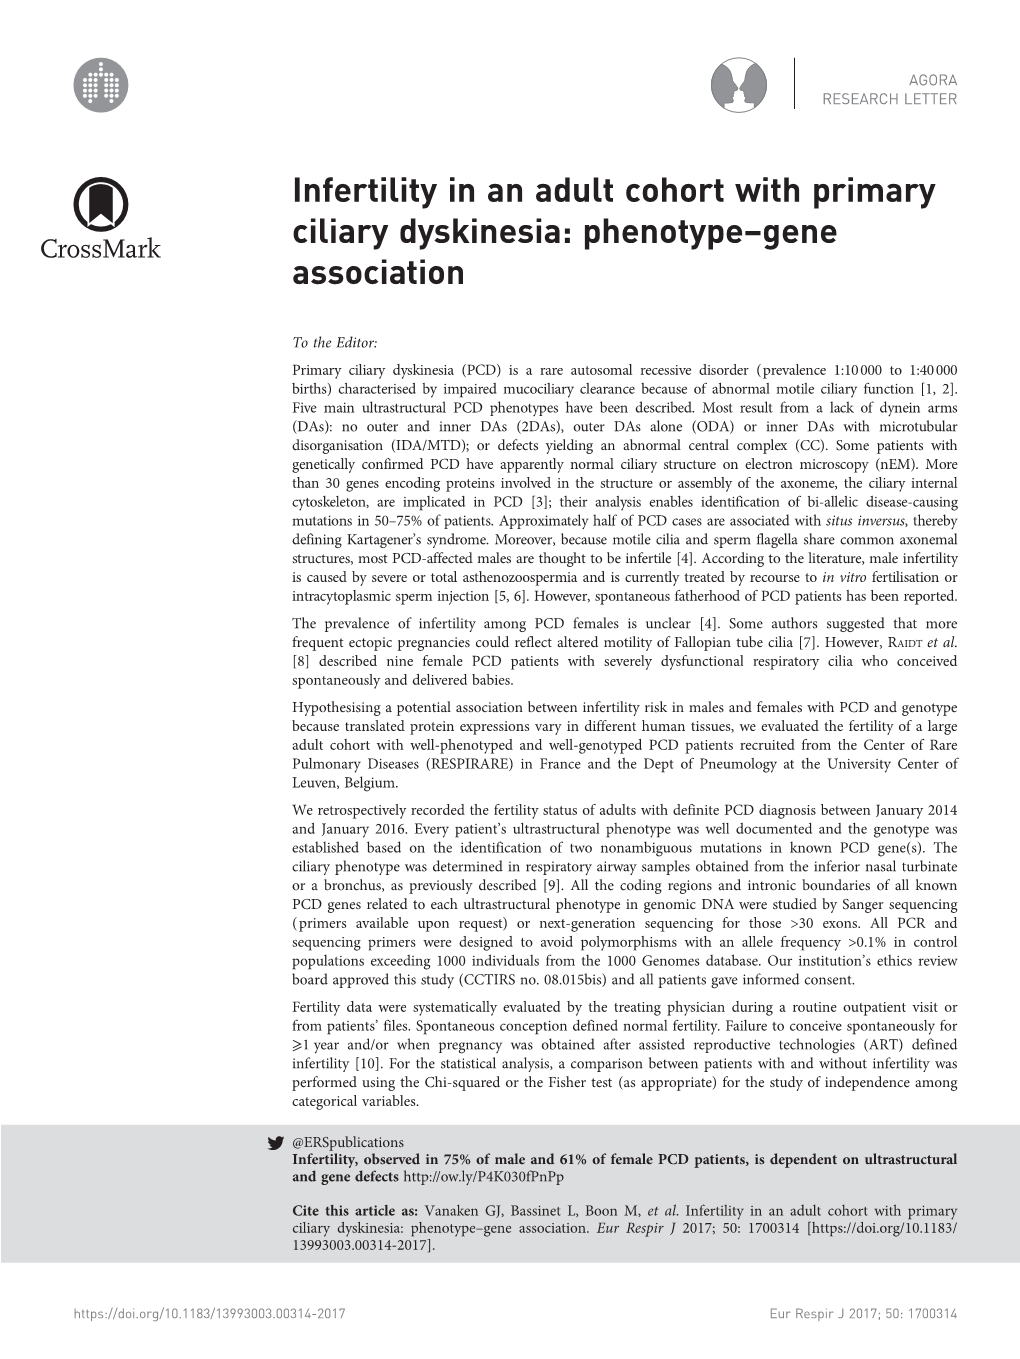 Infertility in an Adult Cohort with Primary Ciliary Dyskinesia: Phenotype–Gene Association